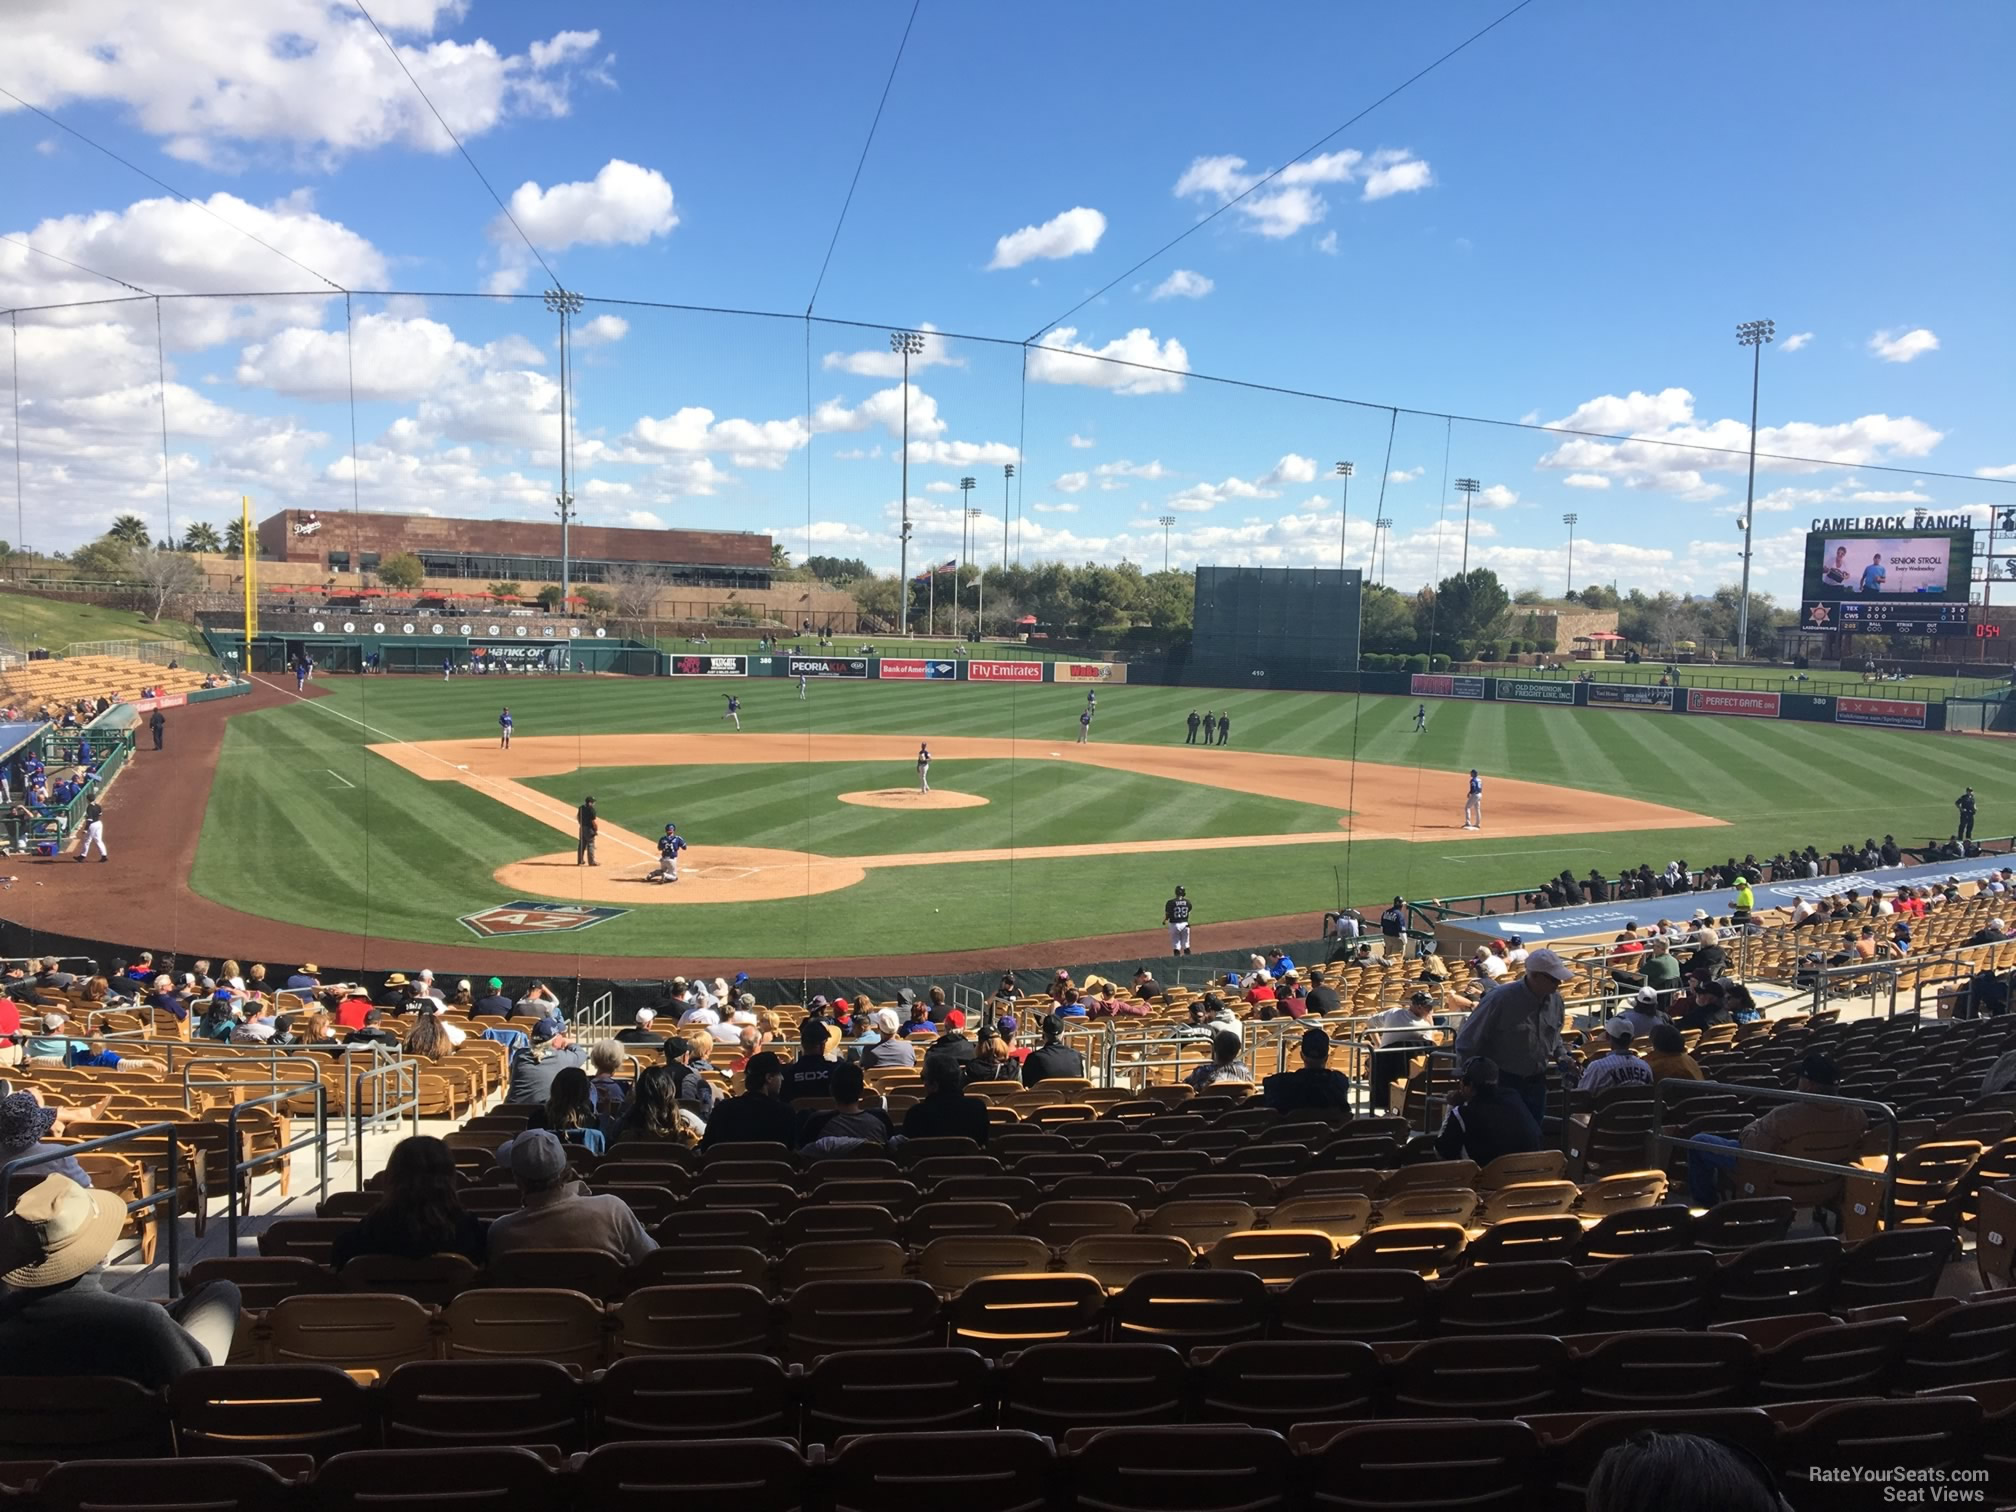 section 113, row 18 seat view  - camelback ranch